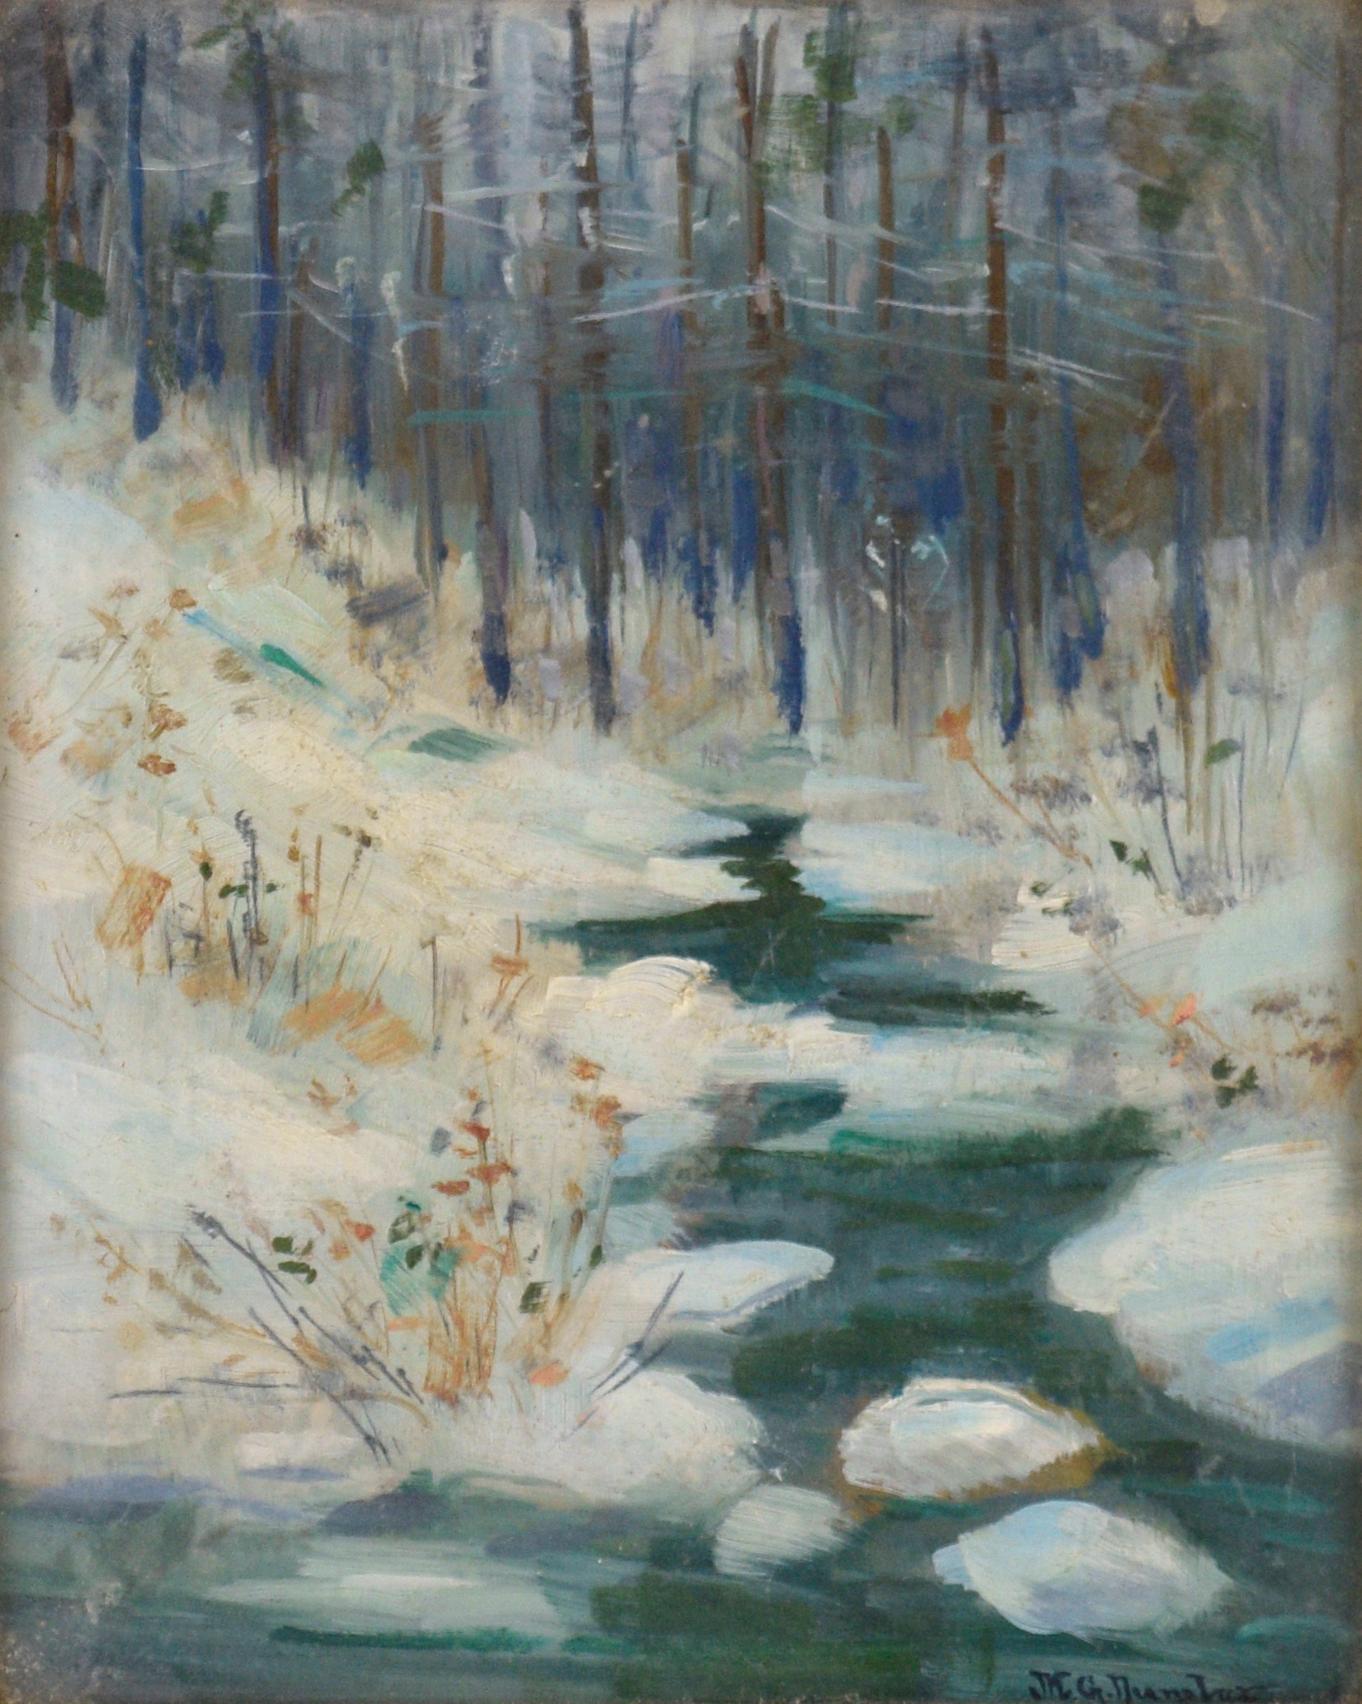 Stream in Winter, Early 20th Century Snowy Landscape  - Painting by Martin Dumler